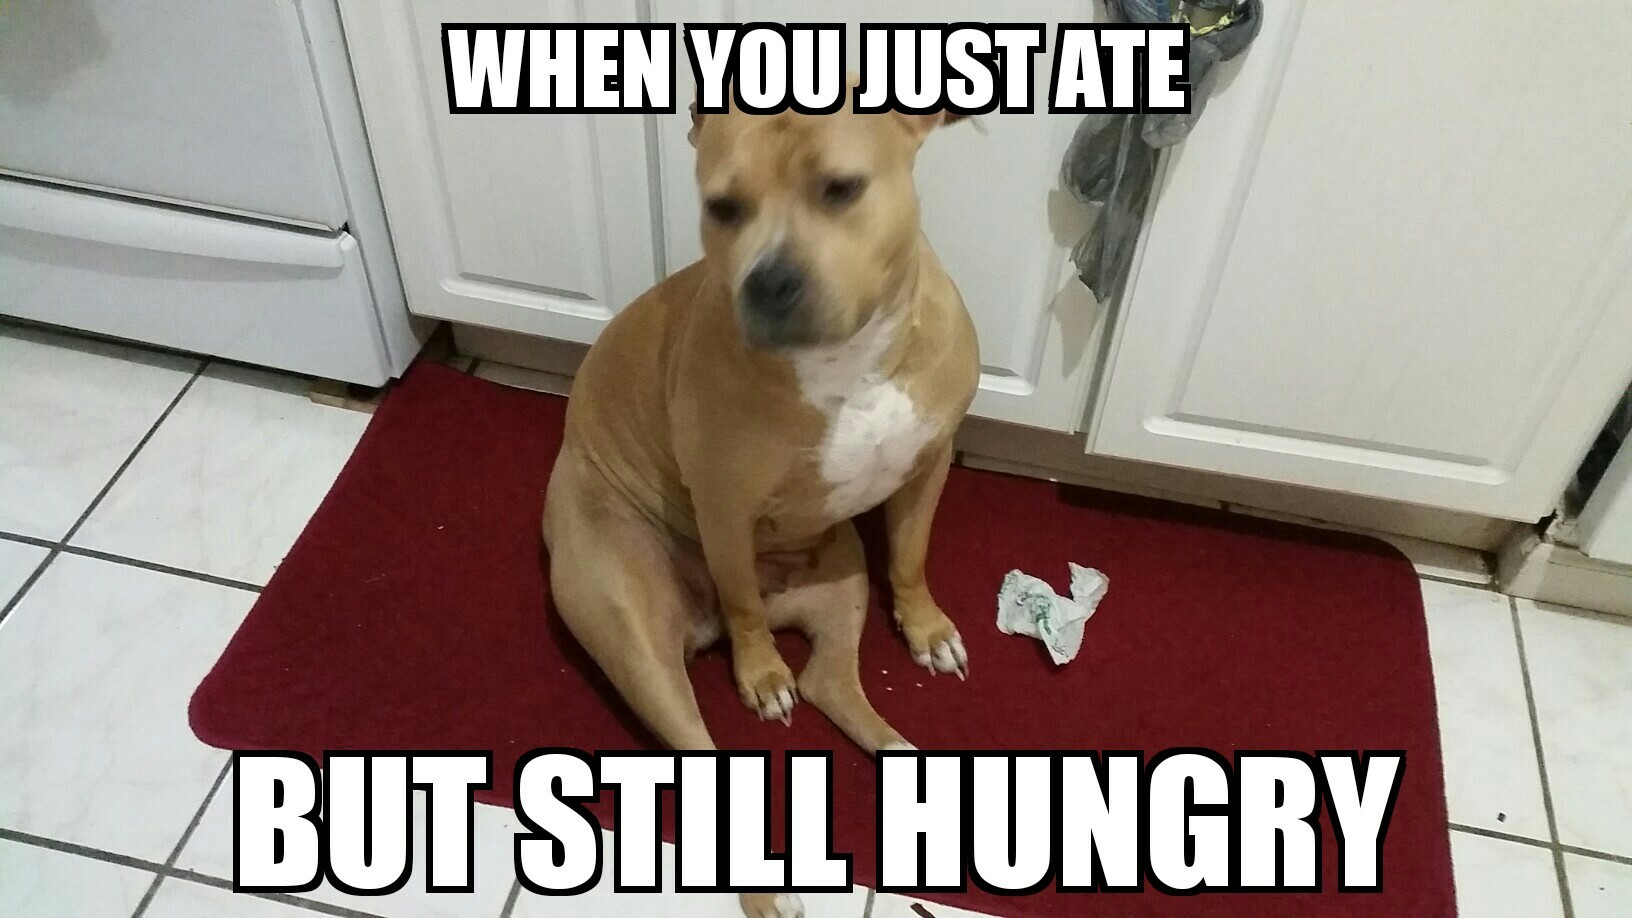 Hungry just ate - meme